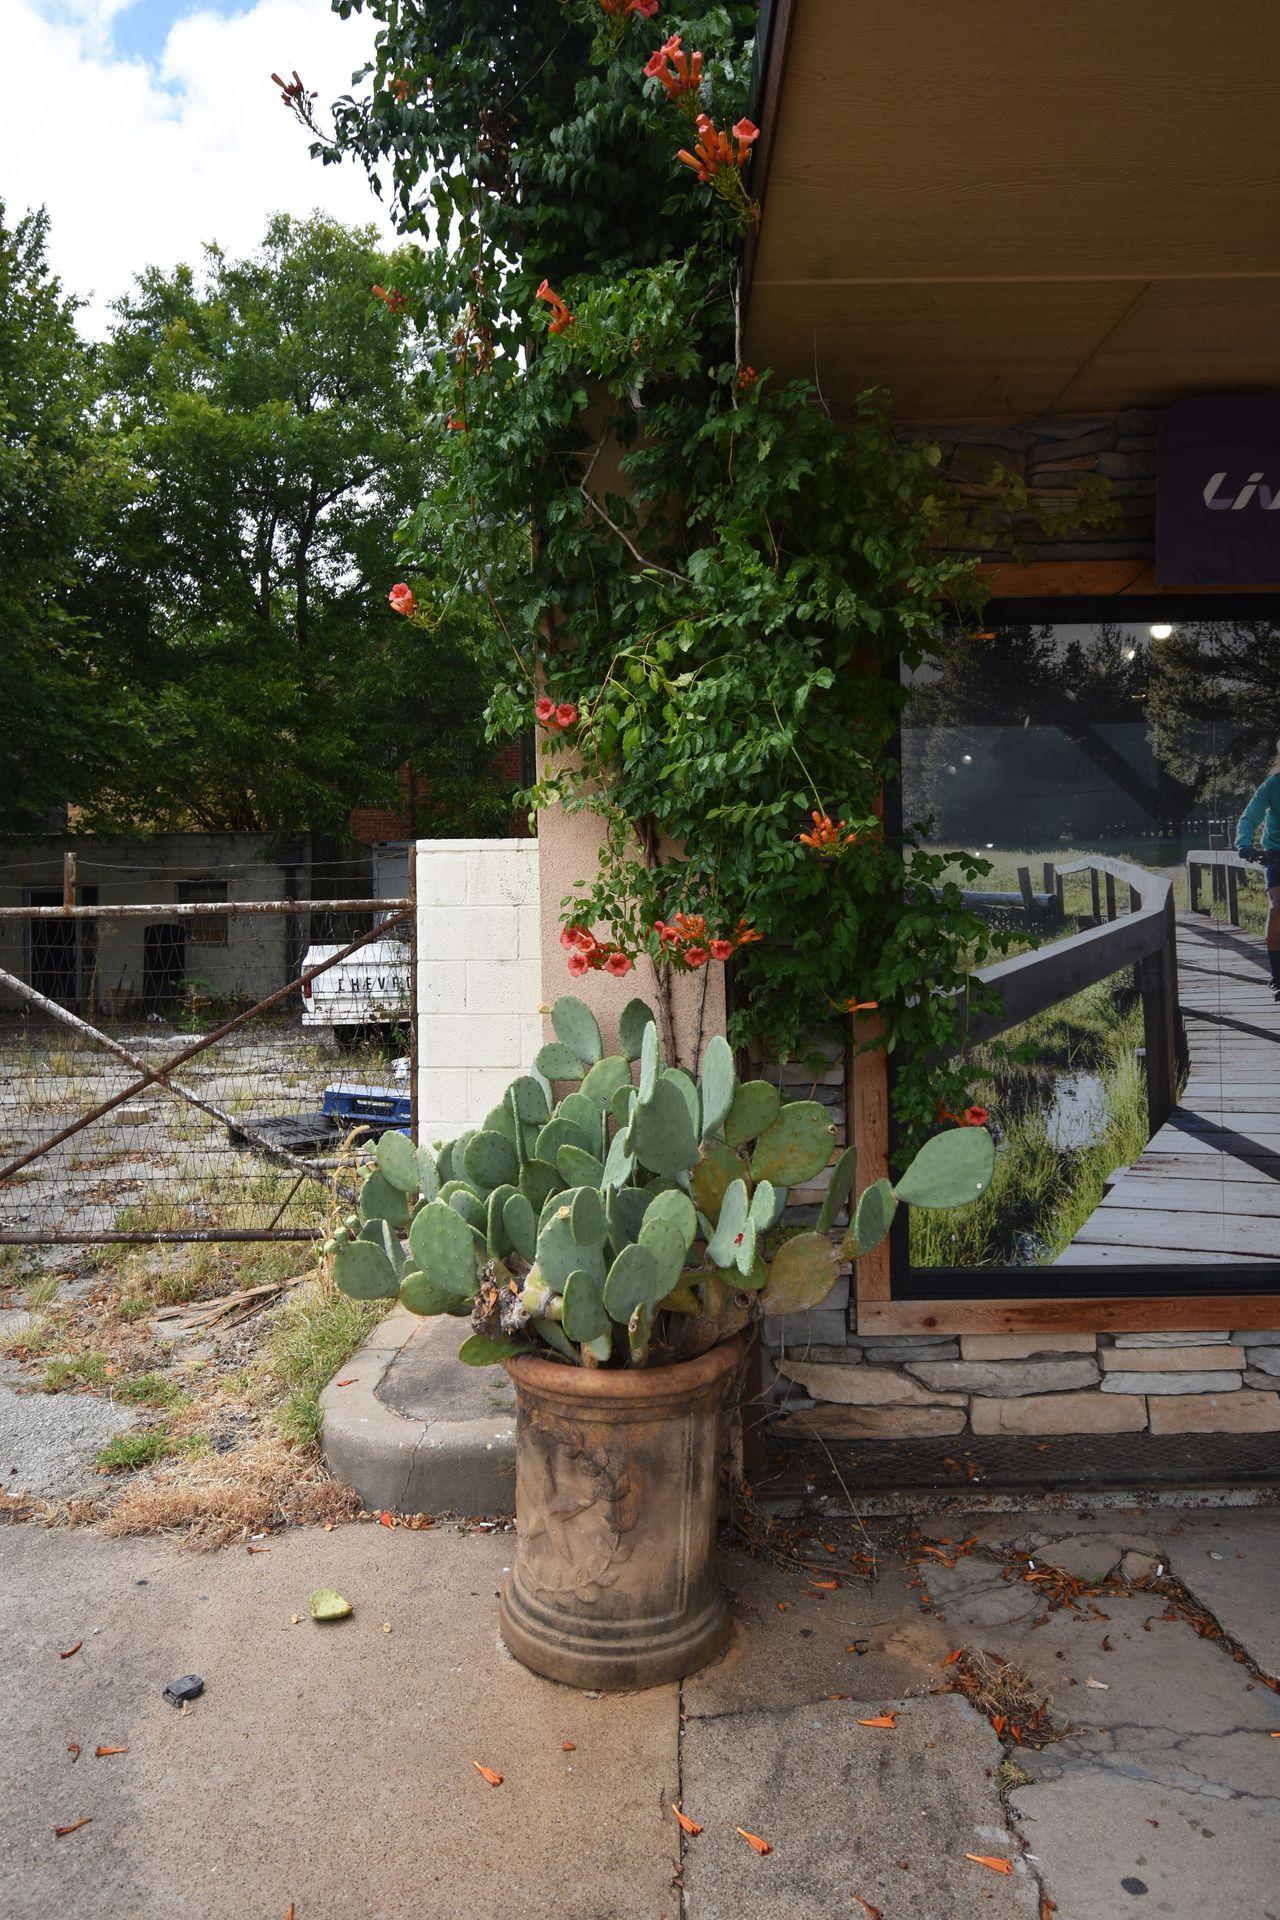 A cactus plant and vines outside a shop in downtown Weatherford